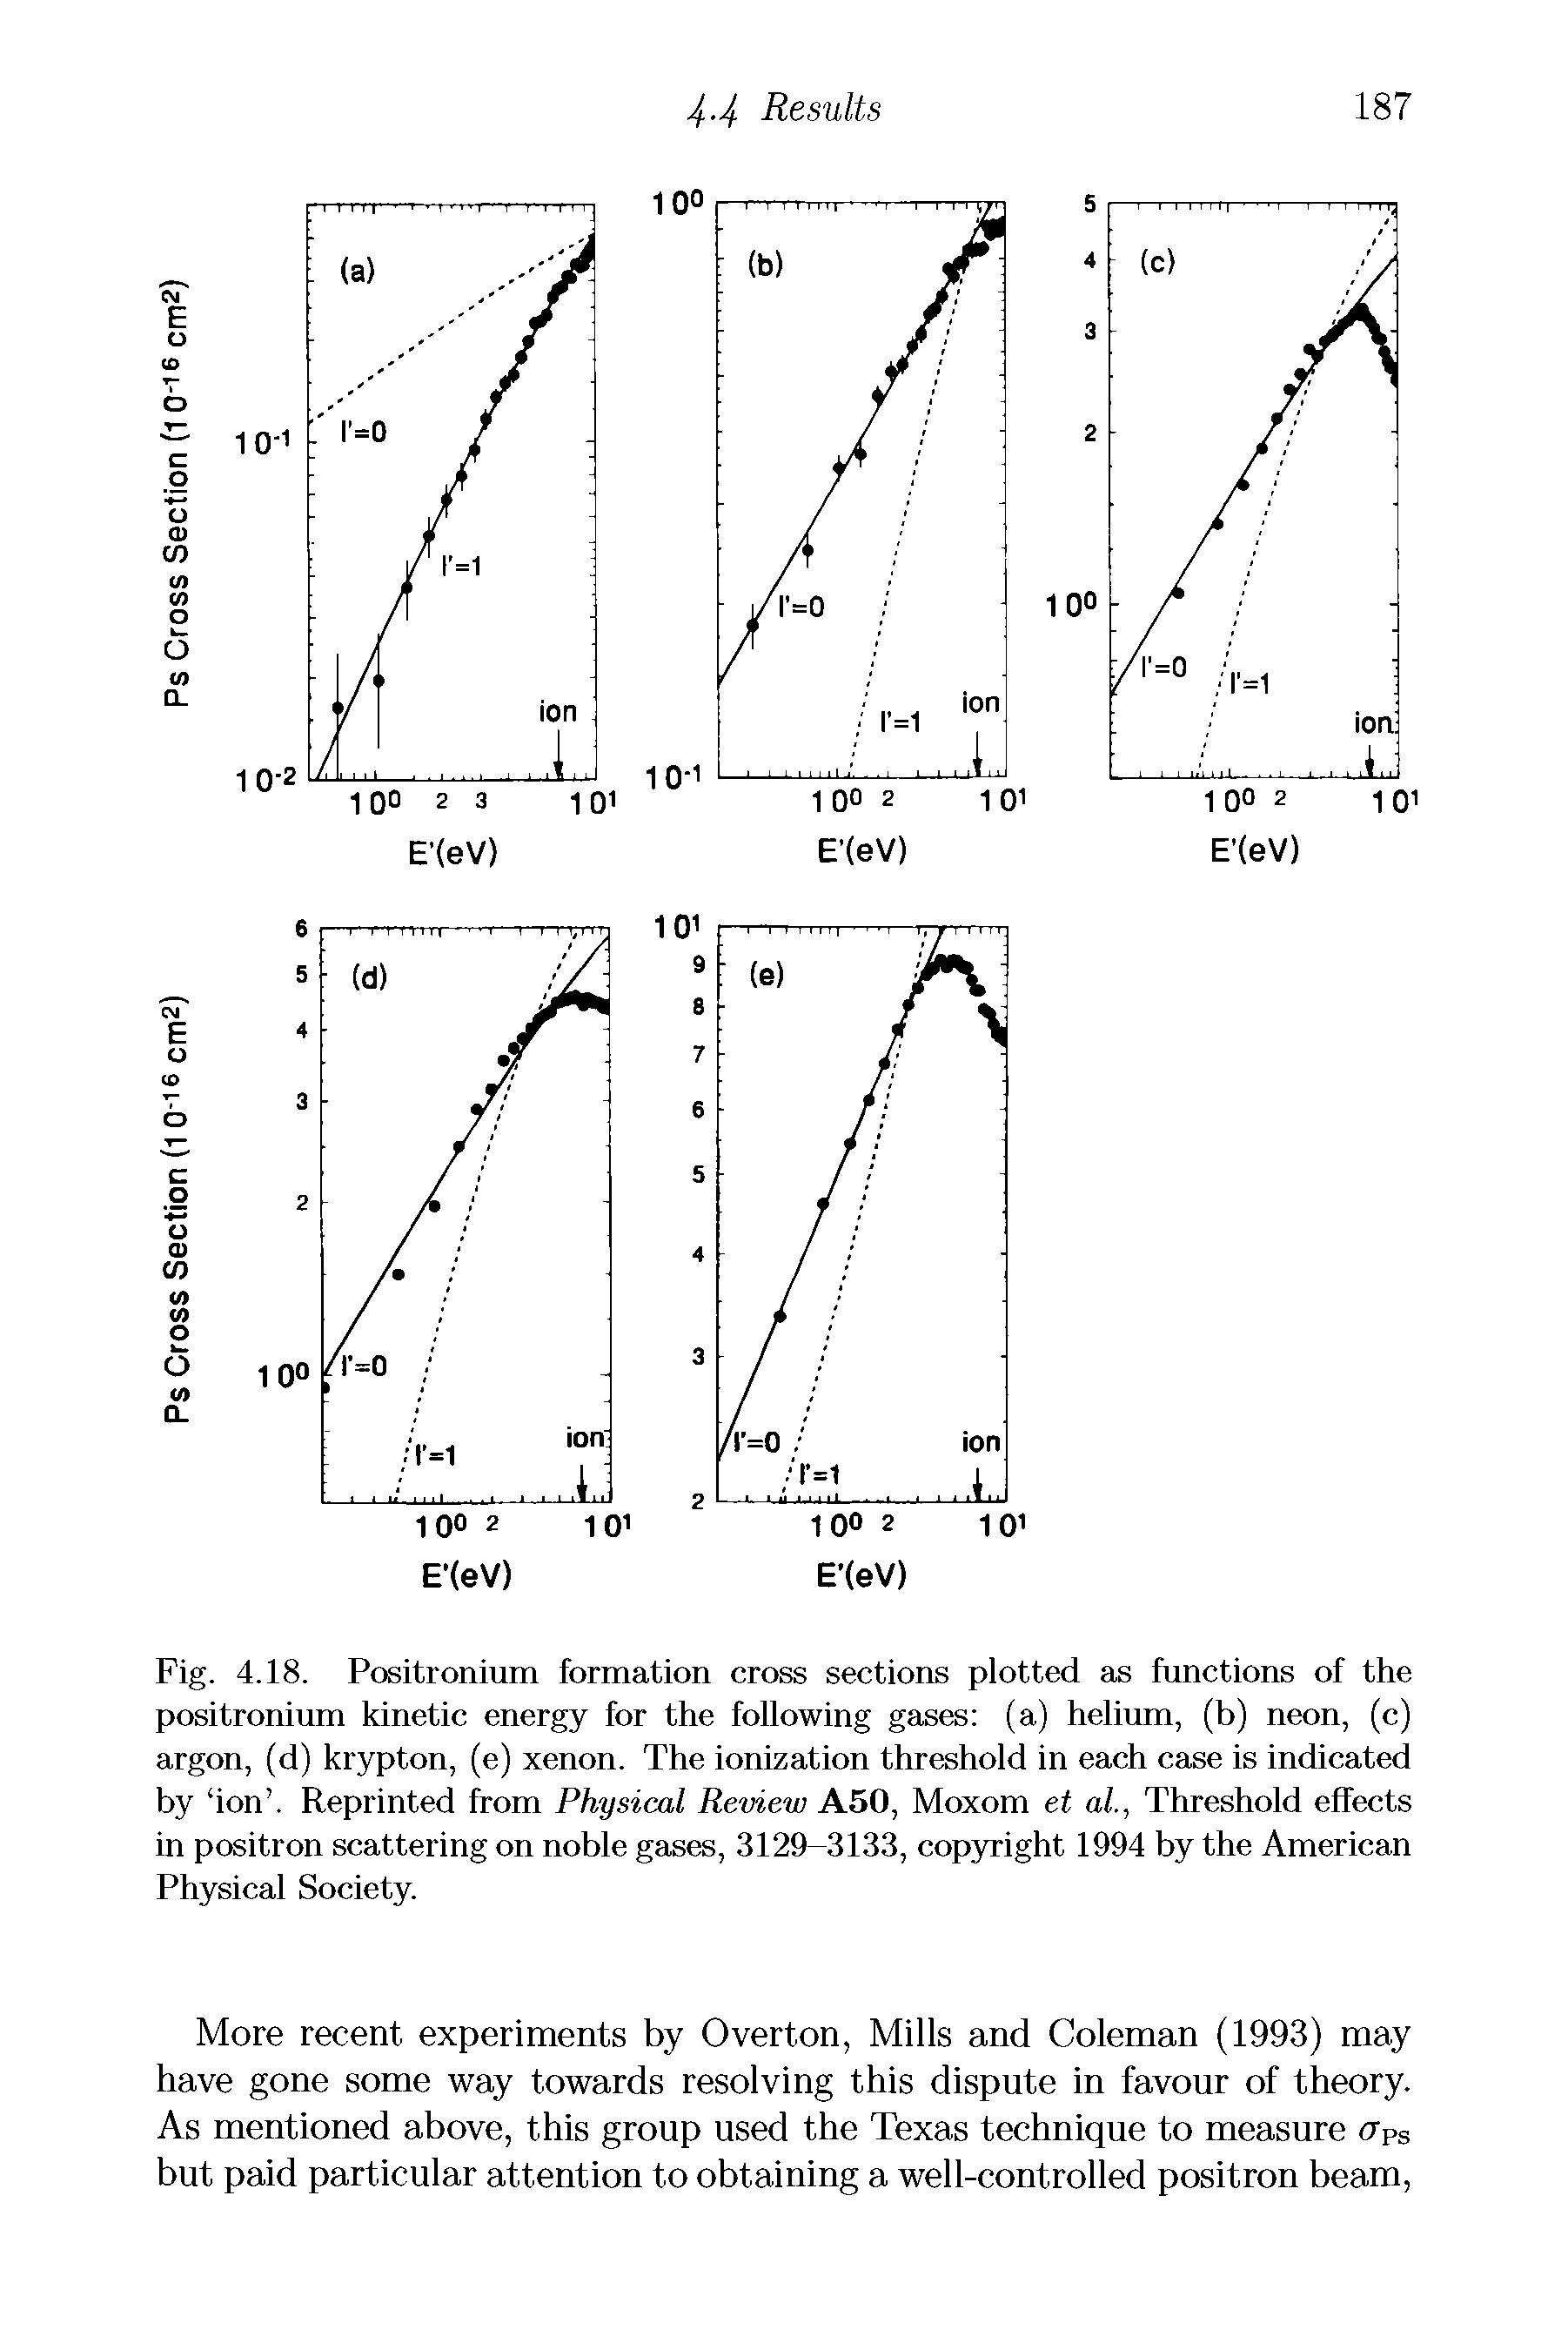 Fig. 4.18. Positronium formation cross sections plotted as functions of the positronium kinetic energy for the following gases (a) helium, (b) neon, (c) argon, (d) krypton, (e) xenon. The ionization threshold in each case is indicated by ion . Reprinted from Physical Review A50, Moxom et al, Threshold effects in positron scattering on noble gases, 3129-3133, copyright 1994 by the American Physical Society.